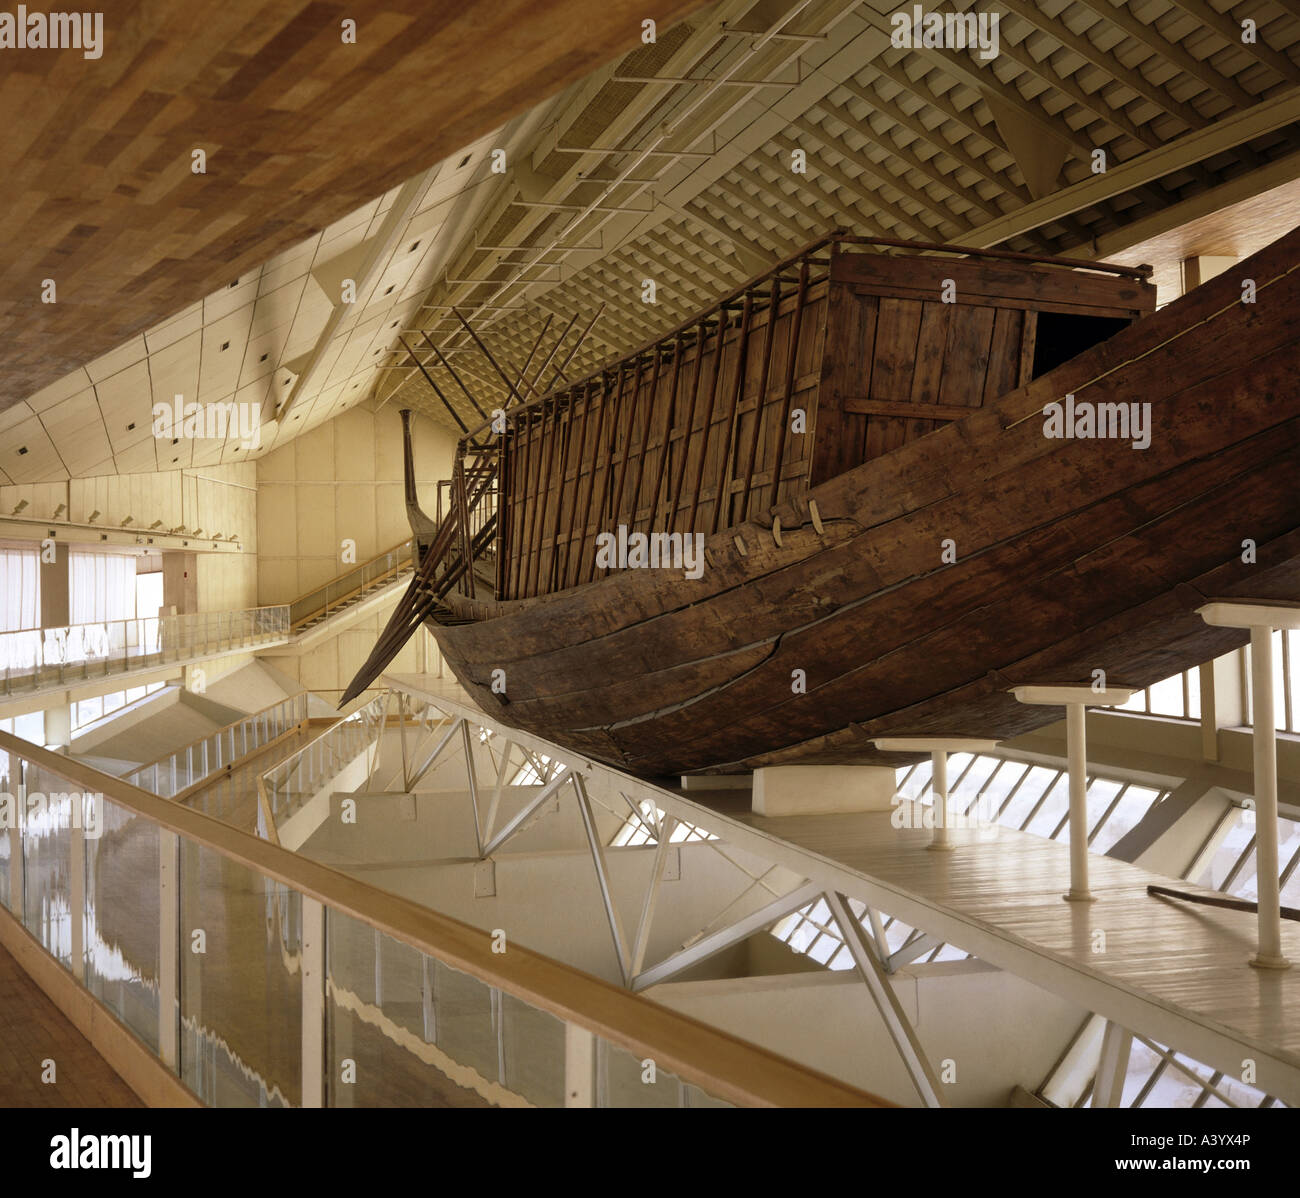 travel /geography, traffic / transport, navigation, ancient world, Egypt, royal barque of pharaoh Khufu for transferring his corpse to his last home, circa 2575 - 2465 BC, Solar Boat museum, Gizah, Giza, historic, historical, Africa, Old Kingdom, 4th dynasty, 26th / 25th century BC, barques, boats, ship, ships, ritual, burial, ancient world, Stock Photo